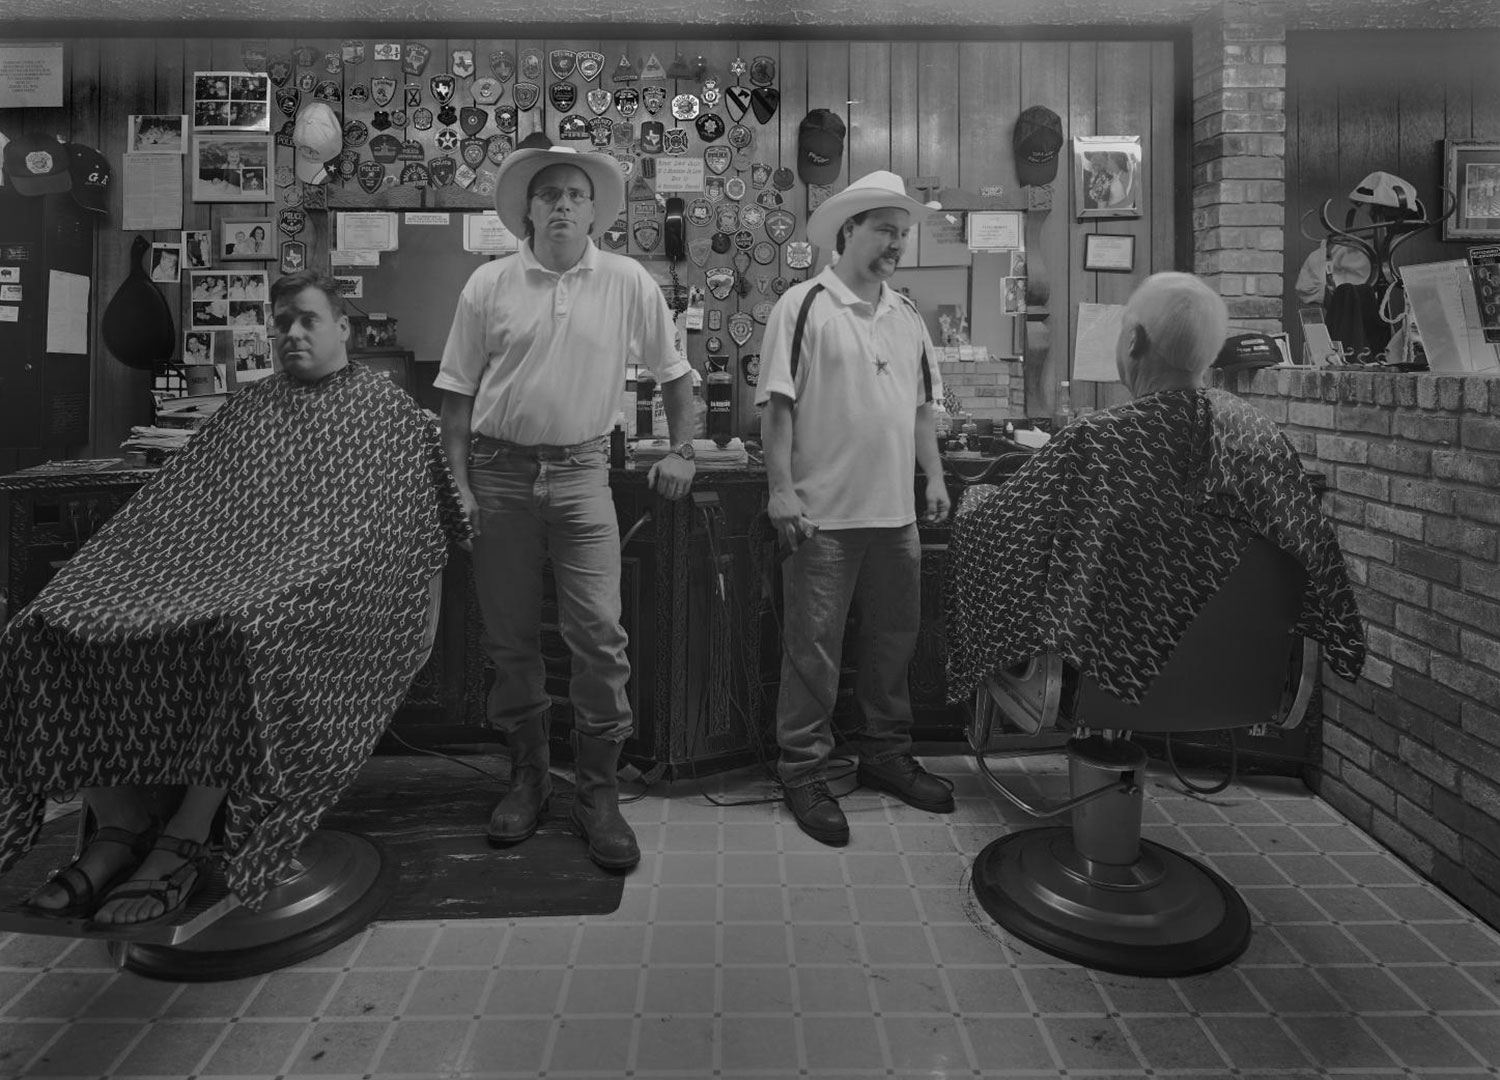 Randy and James Russell, Jr. with customers at Plano Barbers in late 1990s // courtesy Byrd M. Williams, IV